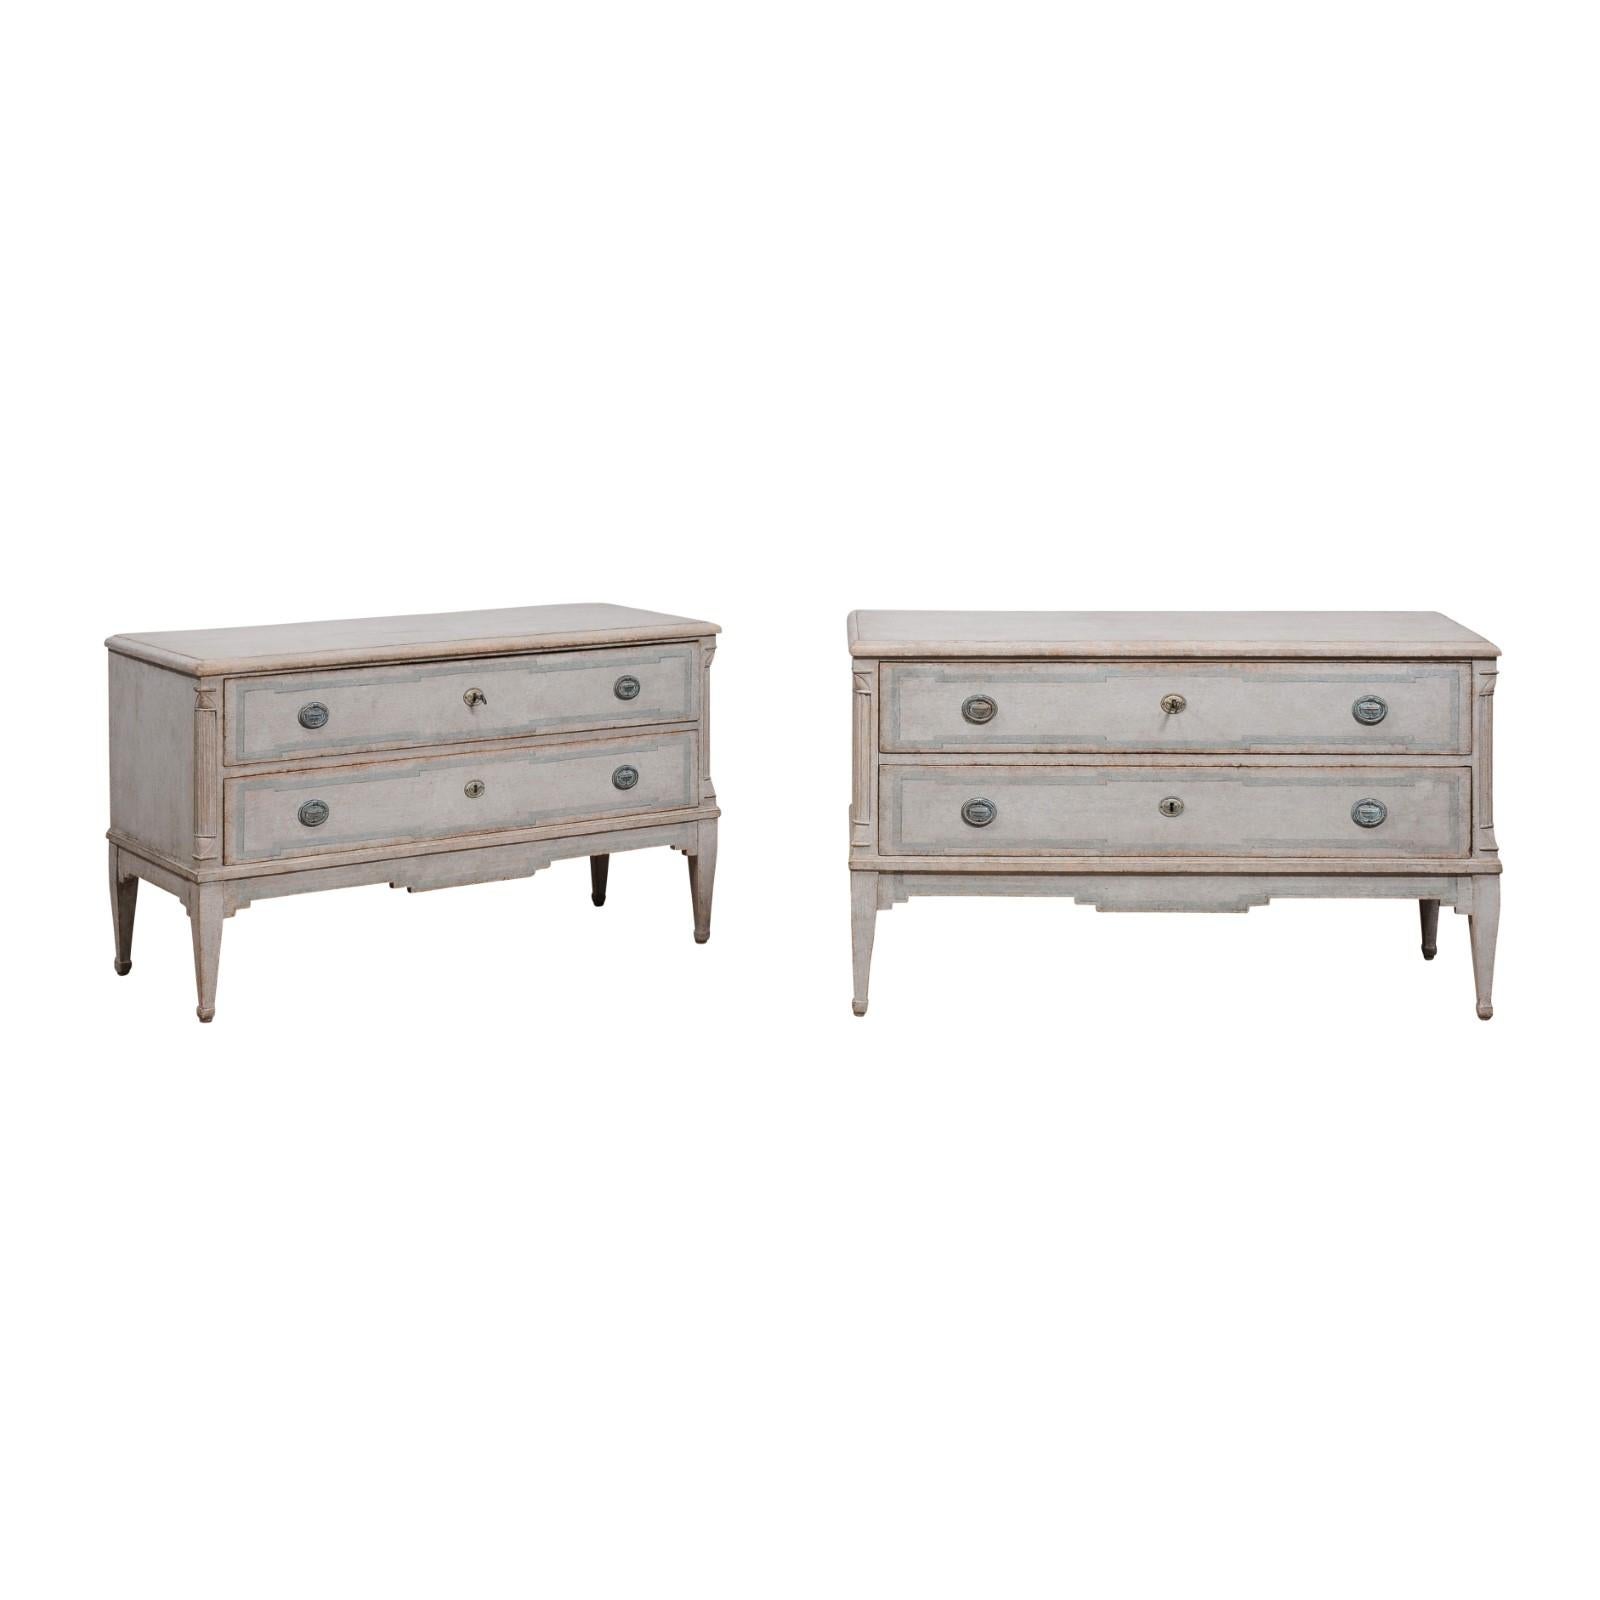 A pair of Danish two-drawer chests from circa 1820 with light gray painted finish, carved fluted semi-columns, tapered legs and painted trim on the drawers. Embrace the understated elegance of Danish design with this exquisite pair of two-drawer